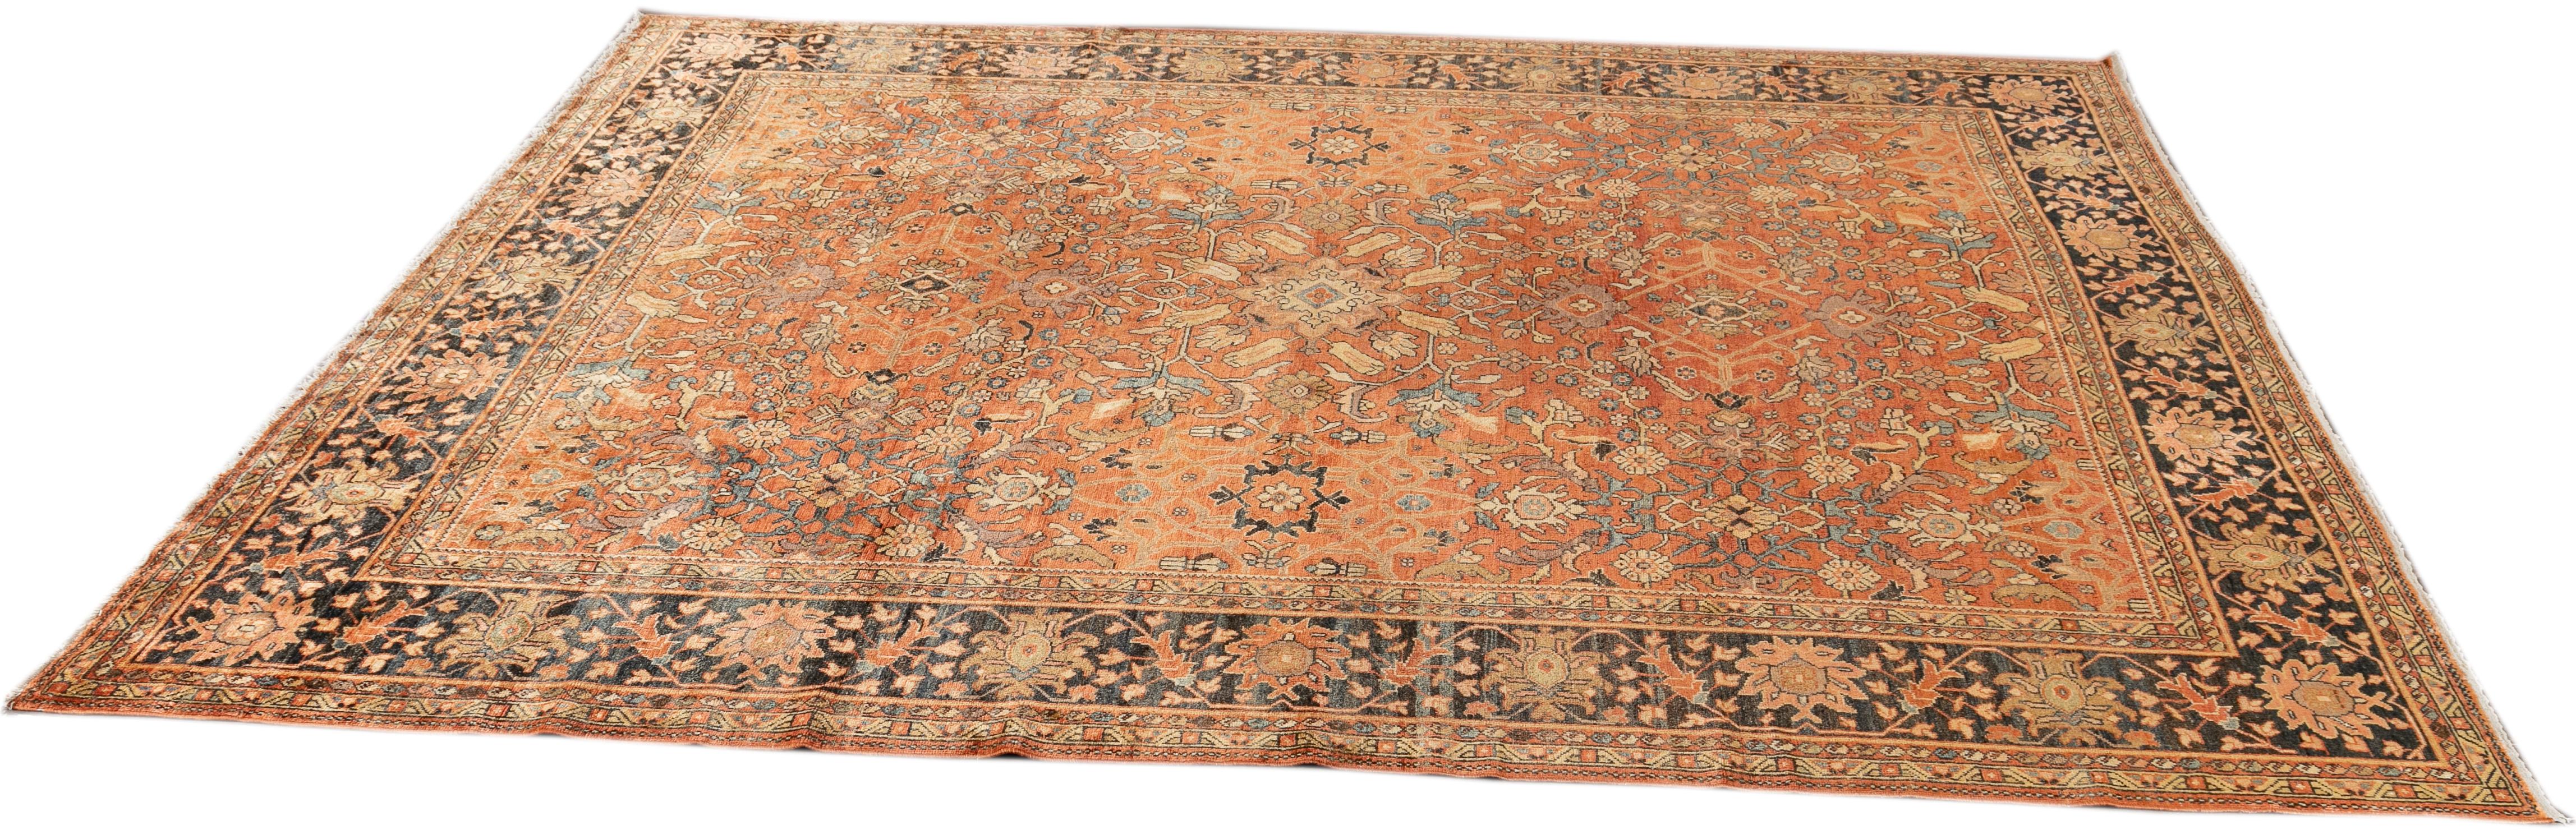 Early 20th Century Antique Mahal Wool Rug 7